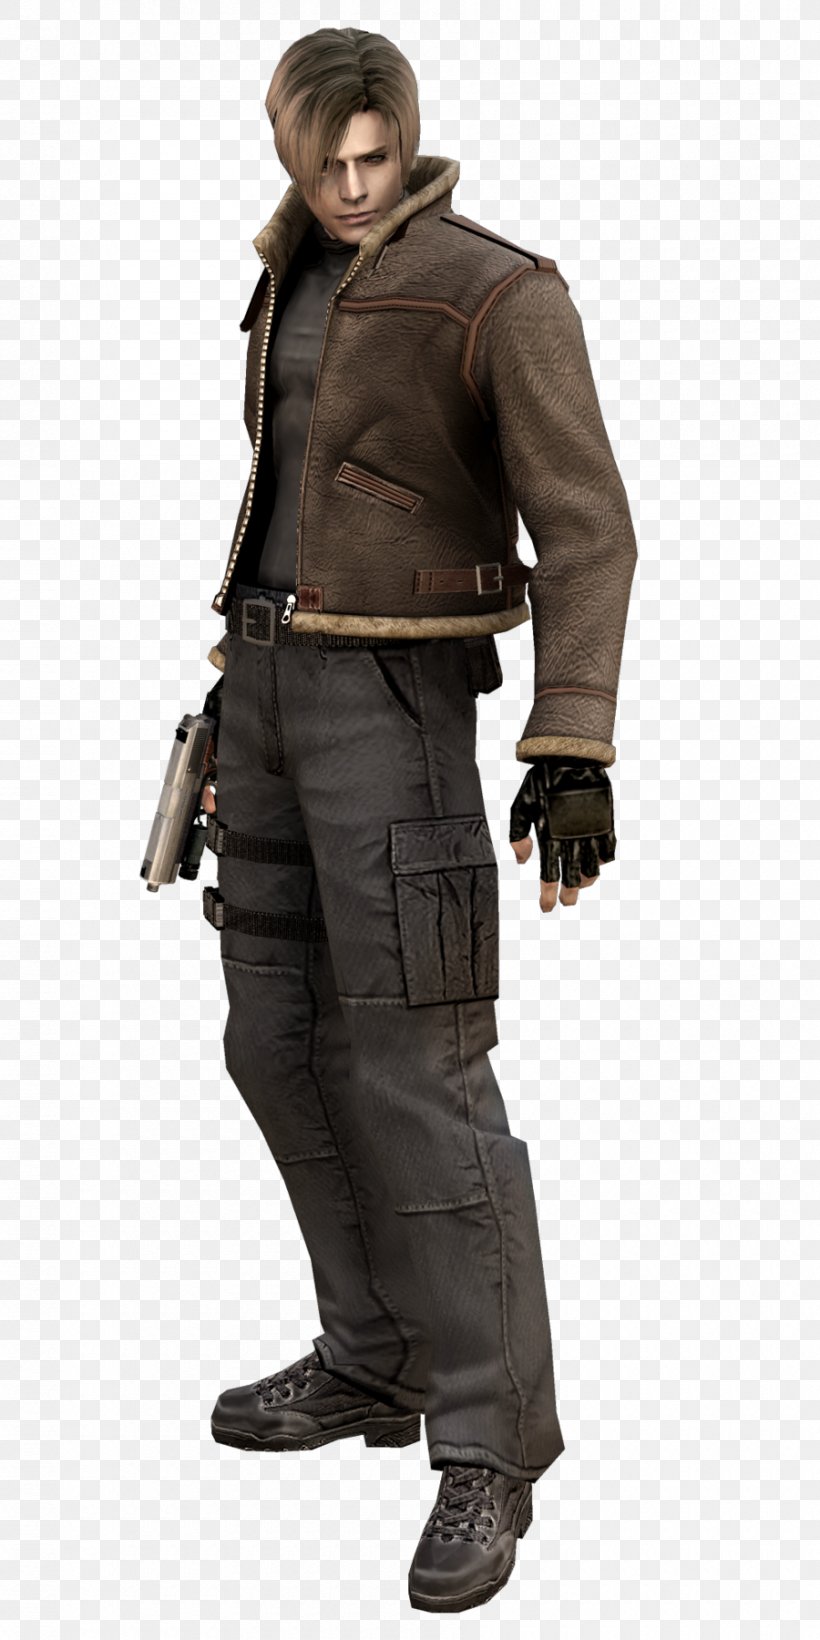 Resident Evil 4 Resident Evil 2 Minecraft Leon S. Kennedy Raccoon City, PNG, 900x1800px, Resident Evil 4, Character, Claire Redfield, Jacket, Las Plagas Download Free